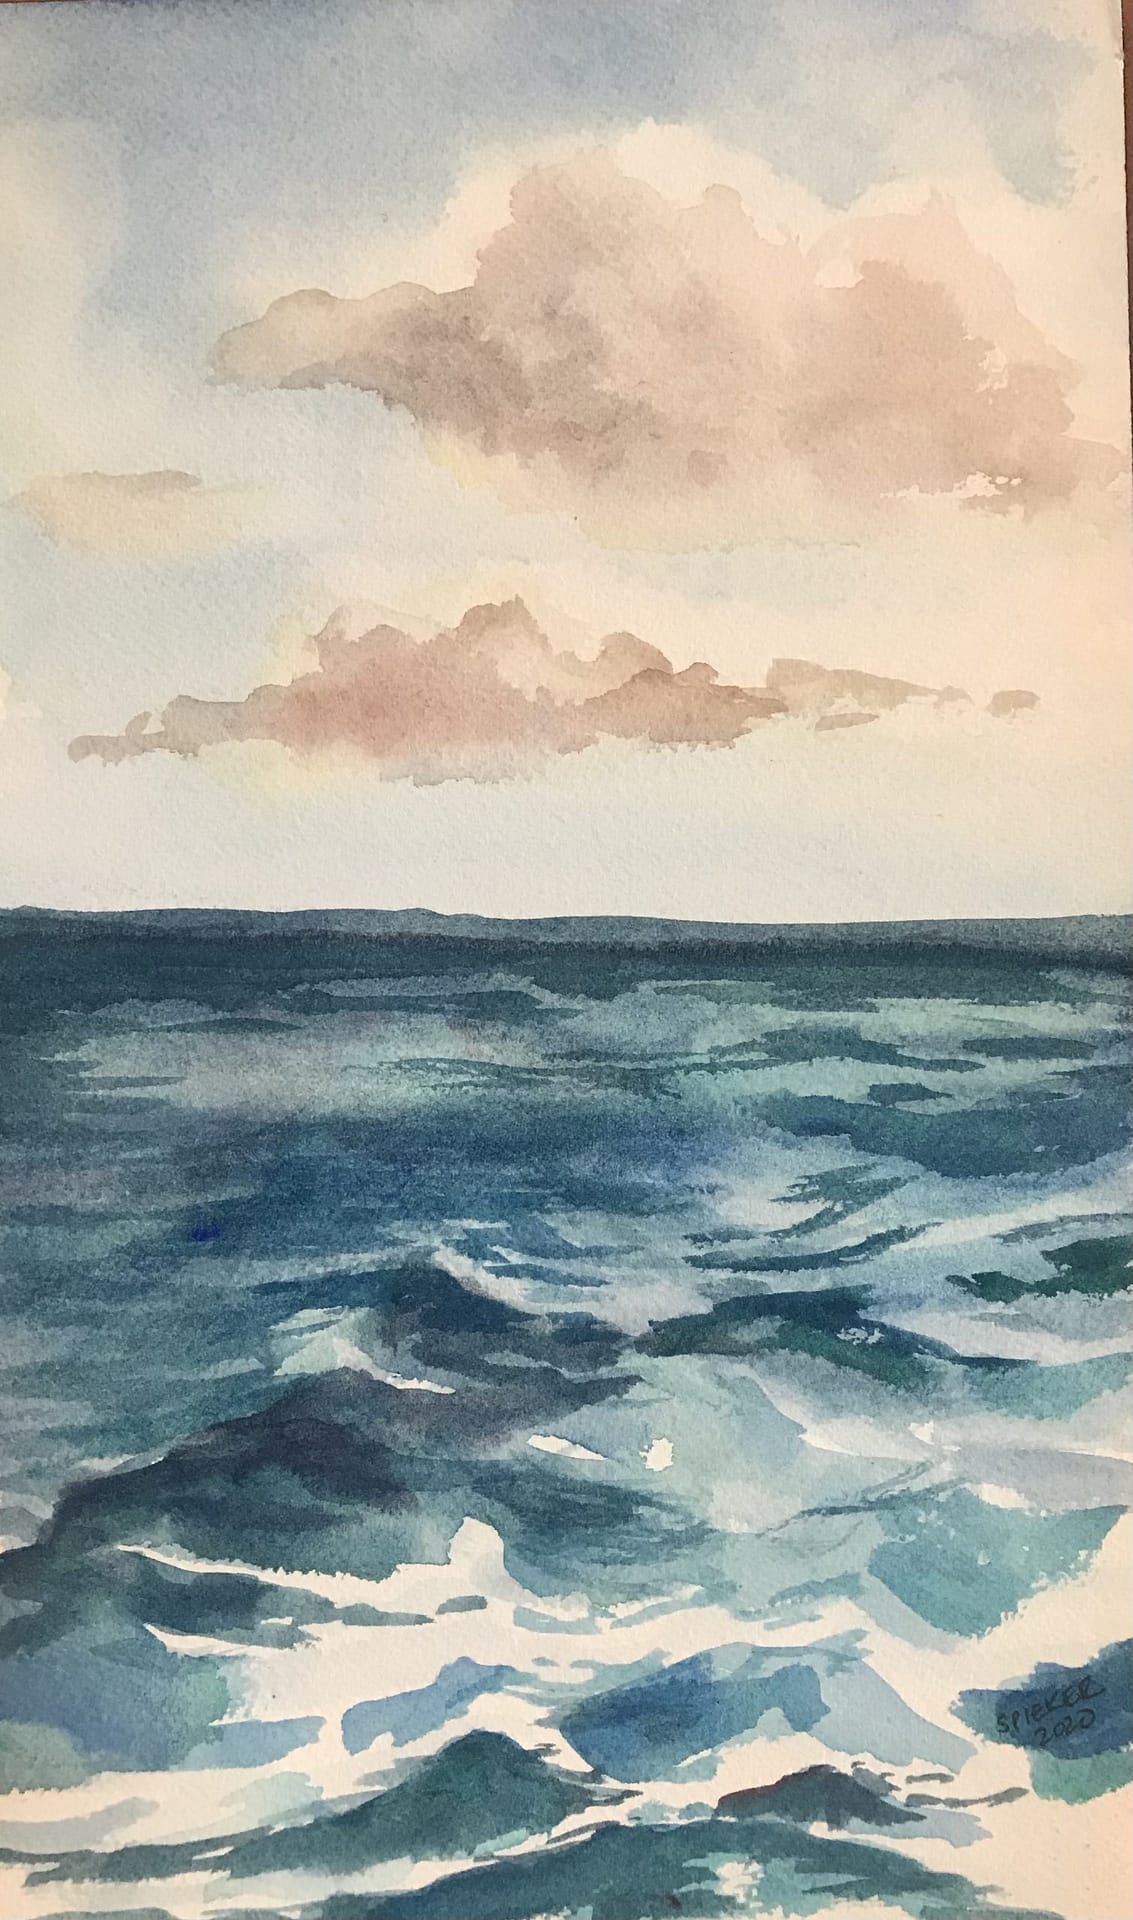 watercolor of calm sea with a few fluffy clouds overhead